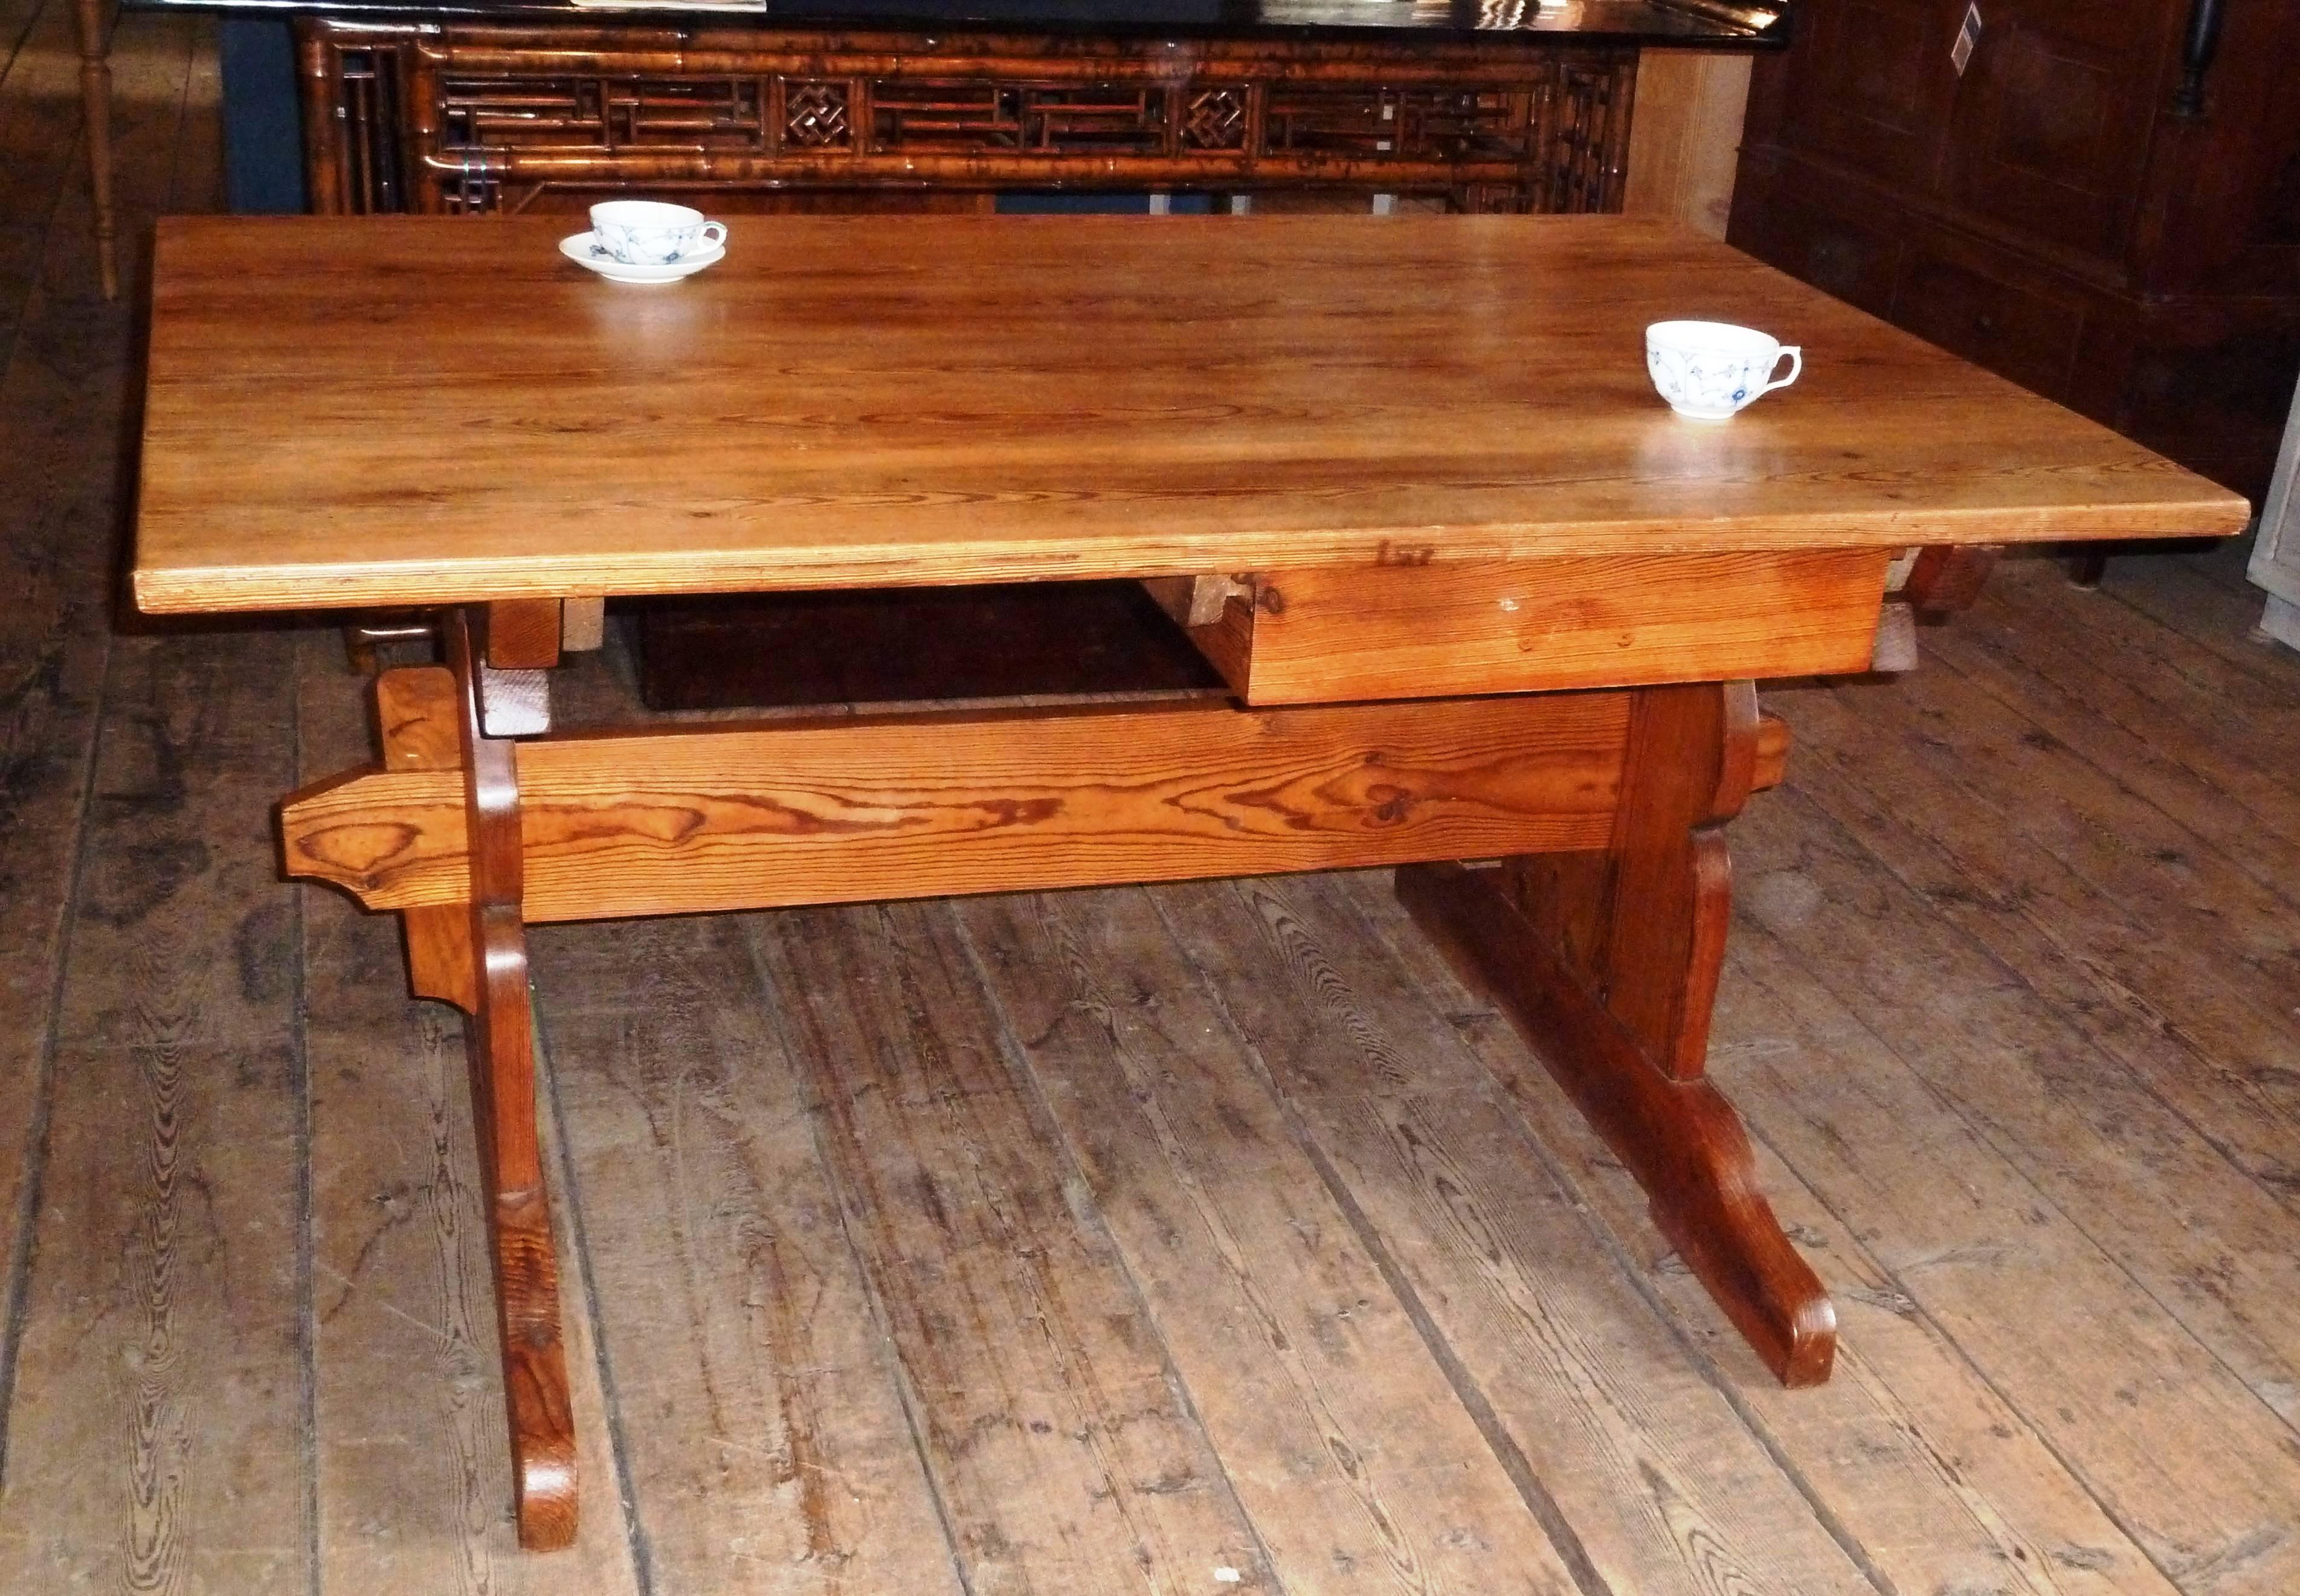 This antique Swedish country farmhouse table displays an unusual smaller size and a very charming handcrafted trestle base form. The table shows an expansive pine top with a beautifully grained warm patina and two large hanging dovetailed drawers